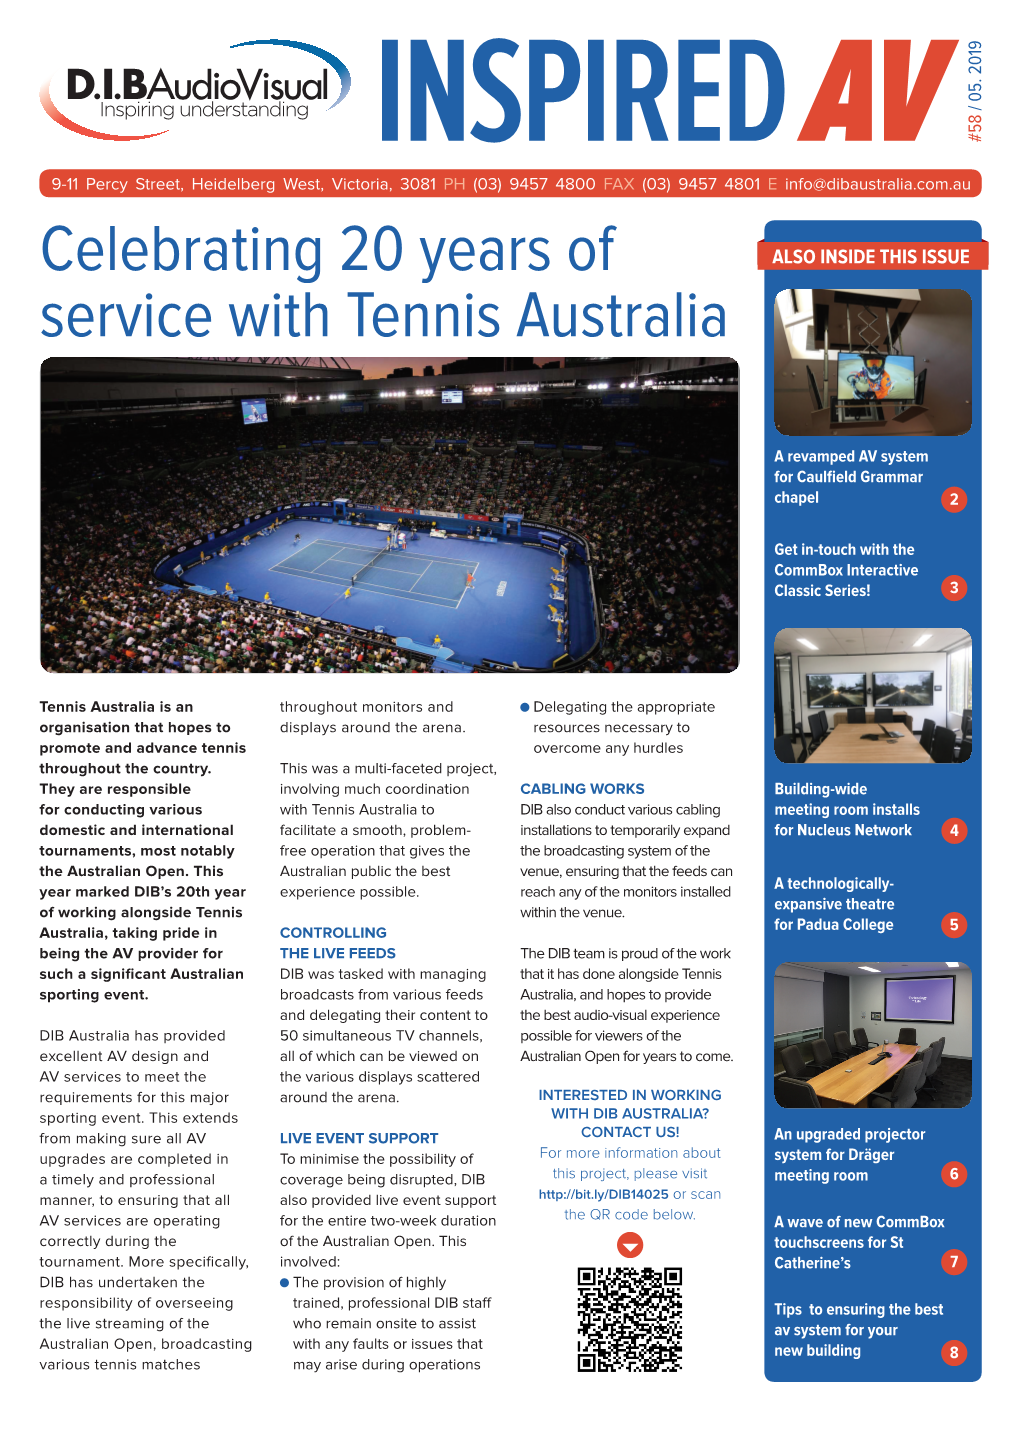 Celebrating 20 Years of Service with Tennis Australia